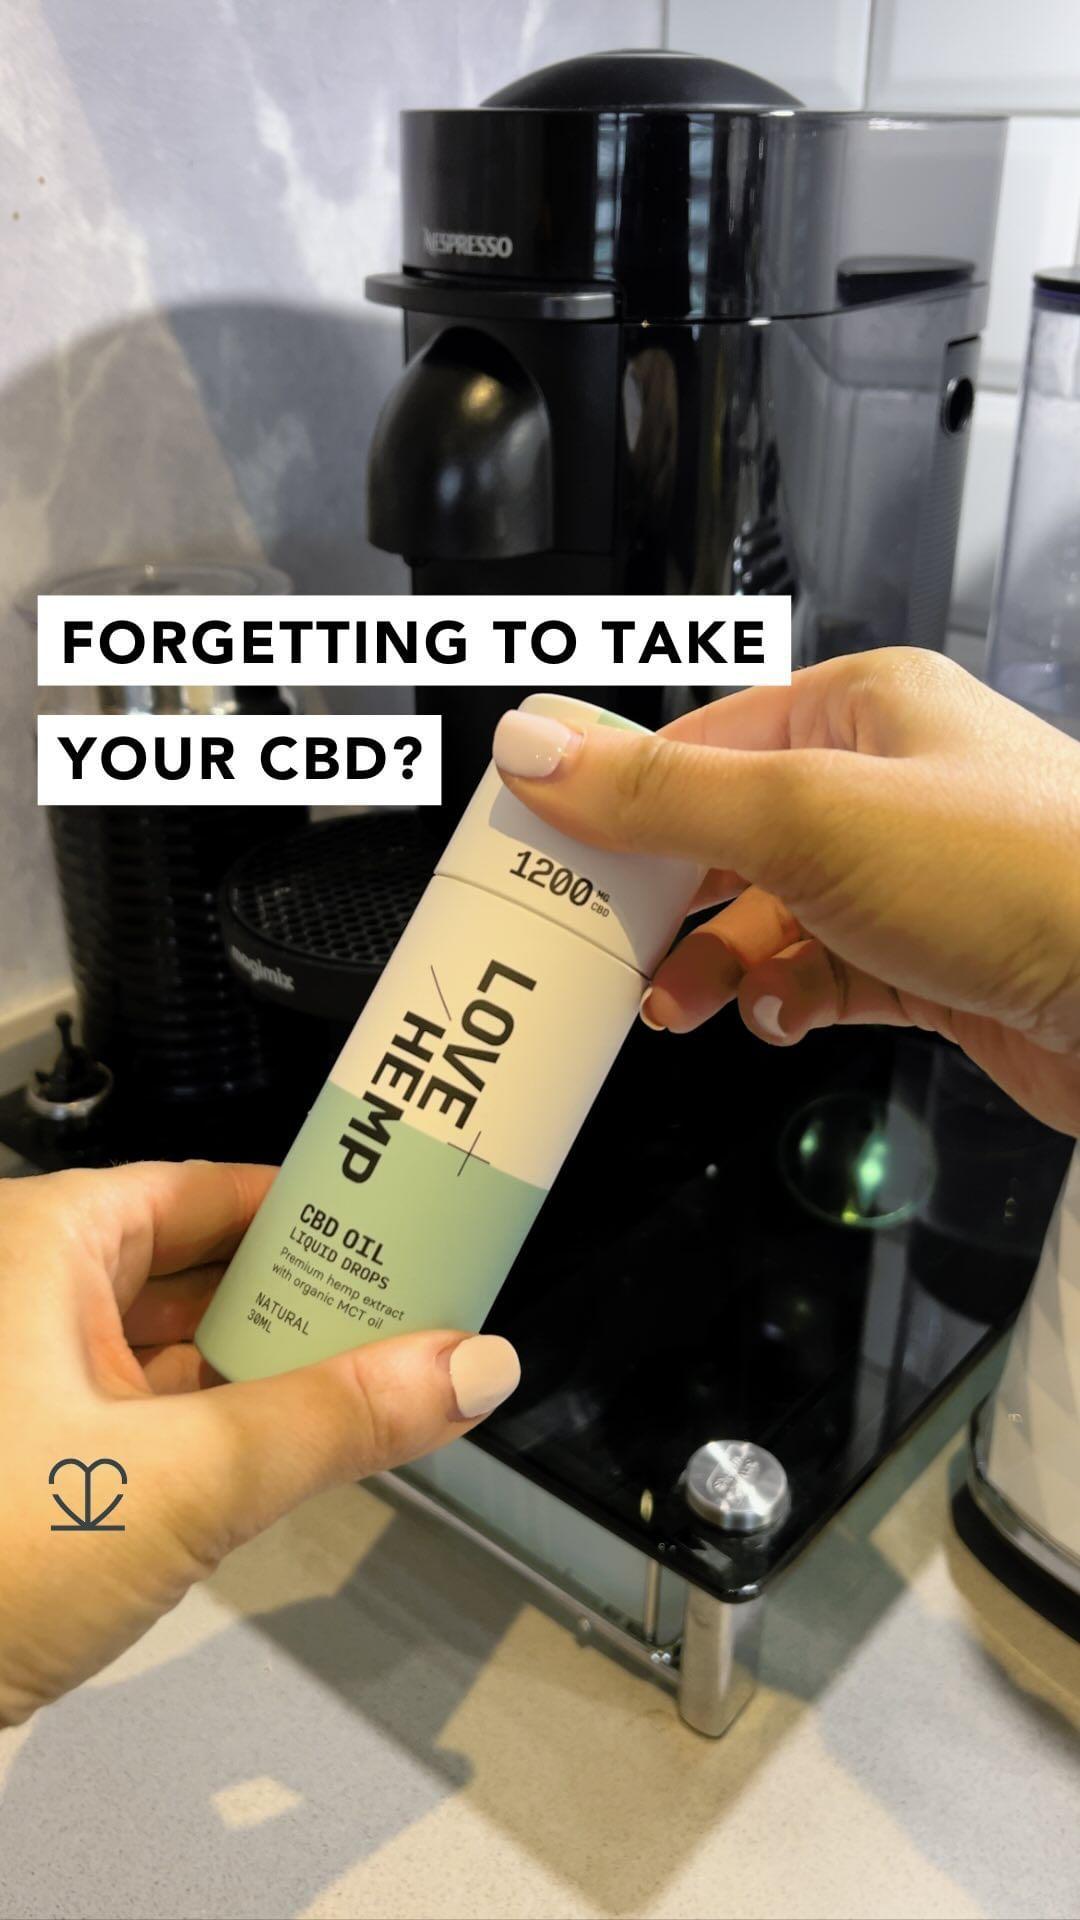 class="content__text"
 It’s simple! Leave it where you’ll see it! CBD works best when taken consistently, everyday. So make sure you remember to take every dose!

 #LoveHemp #LoveLife #wellness 
 